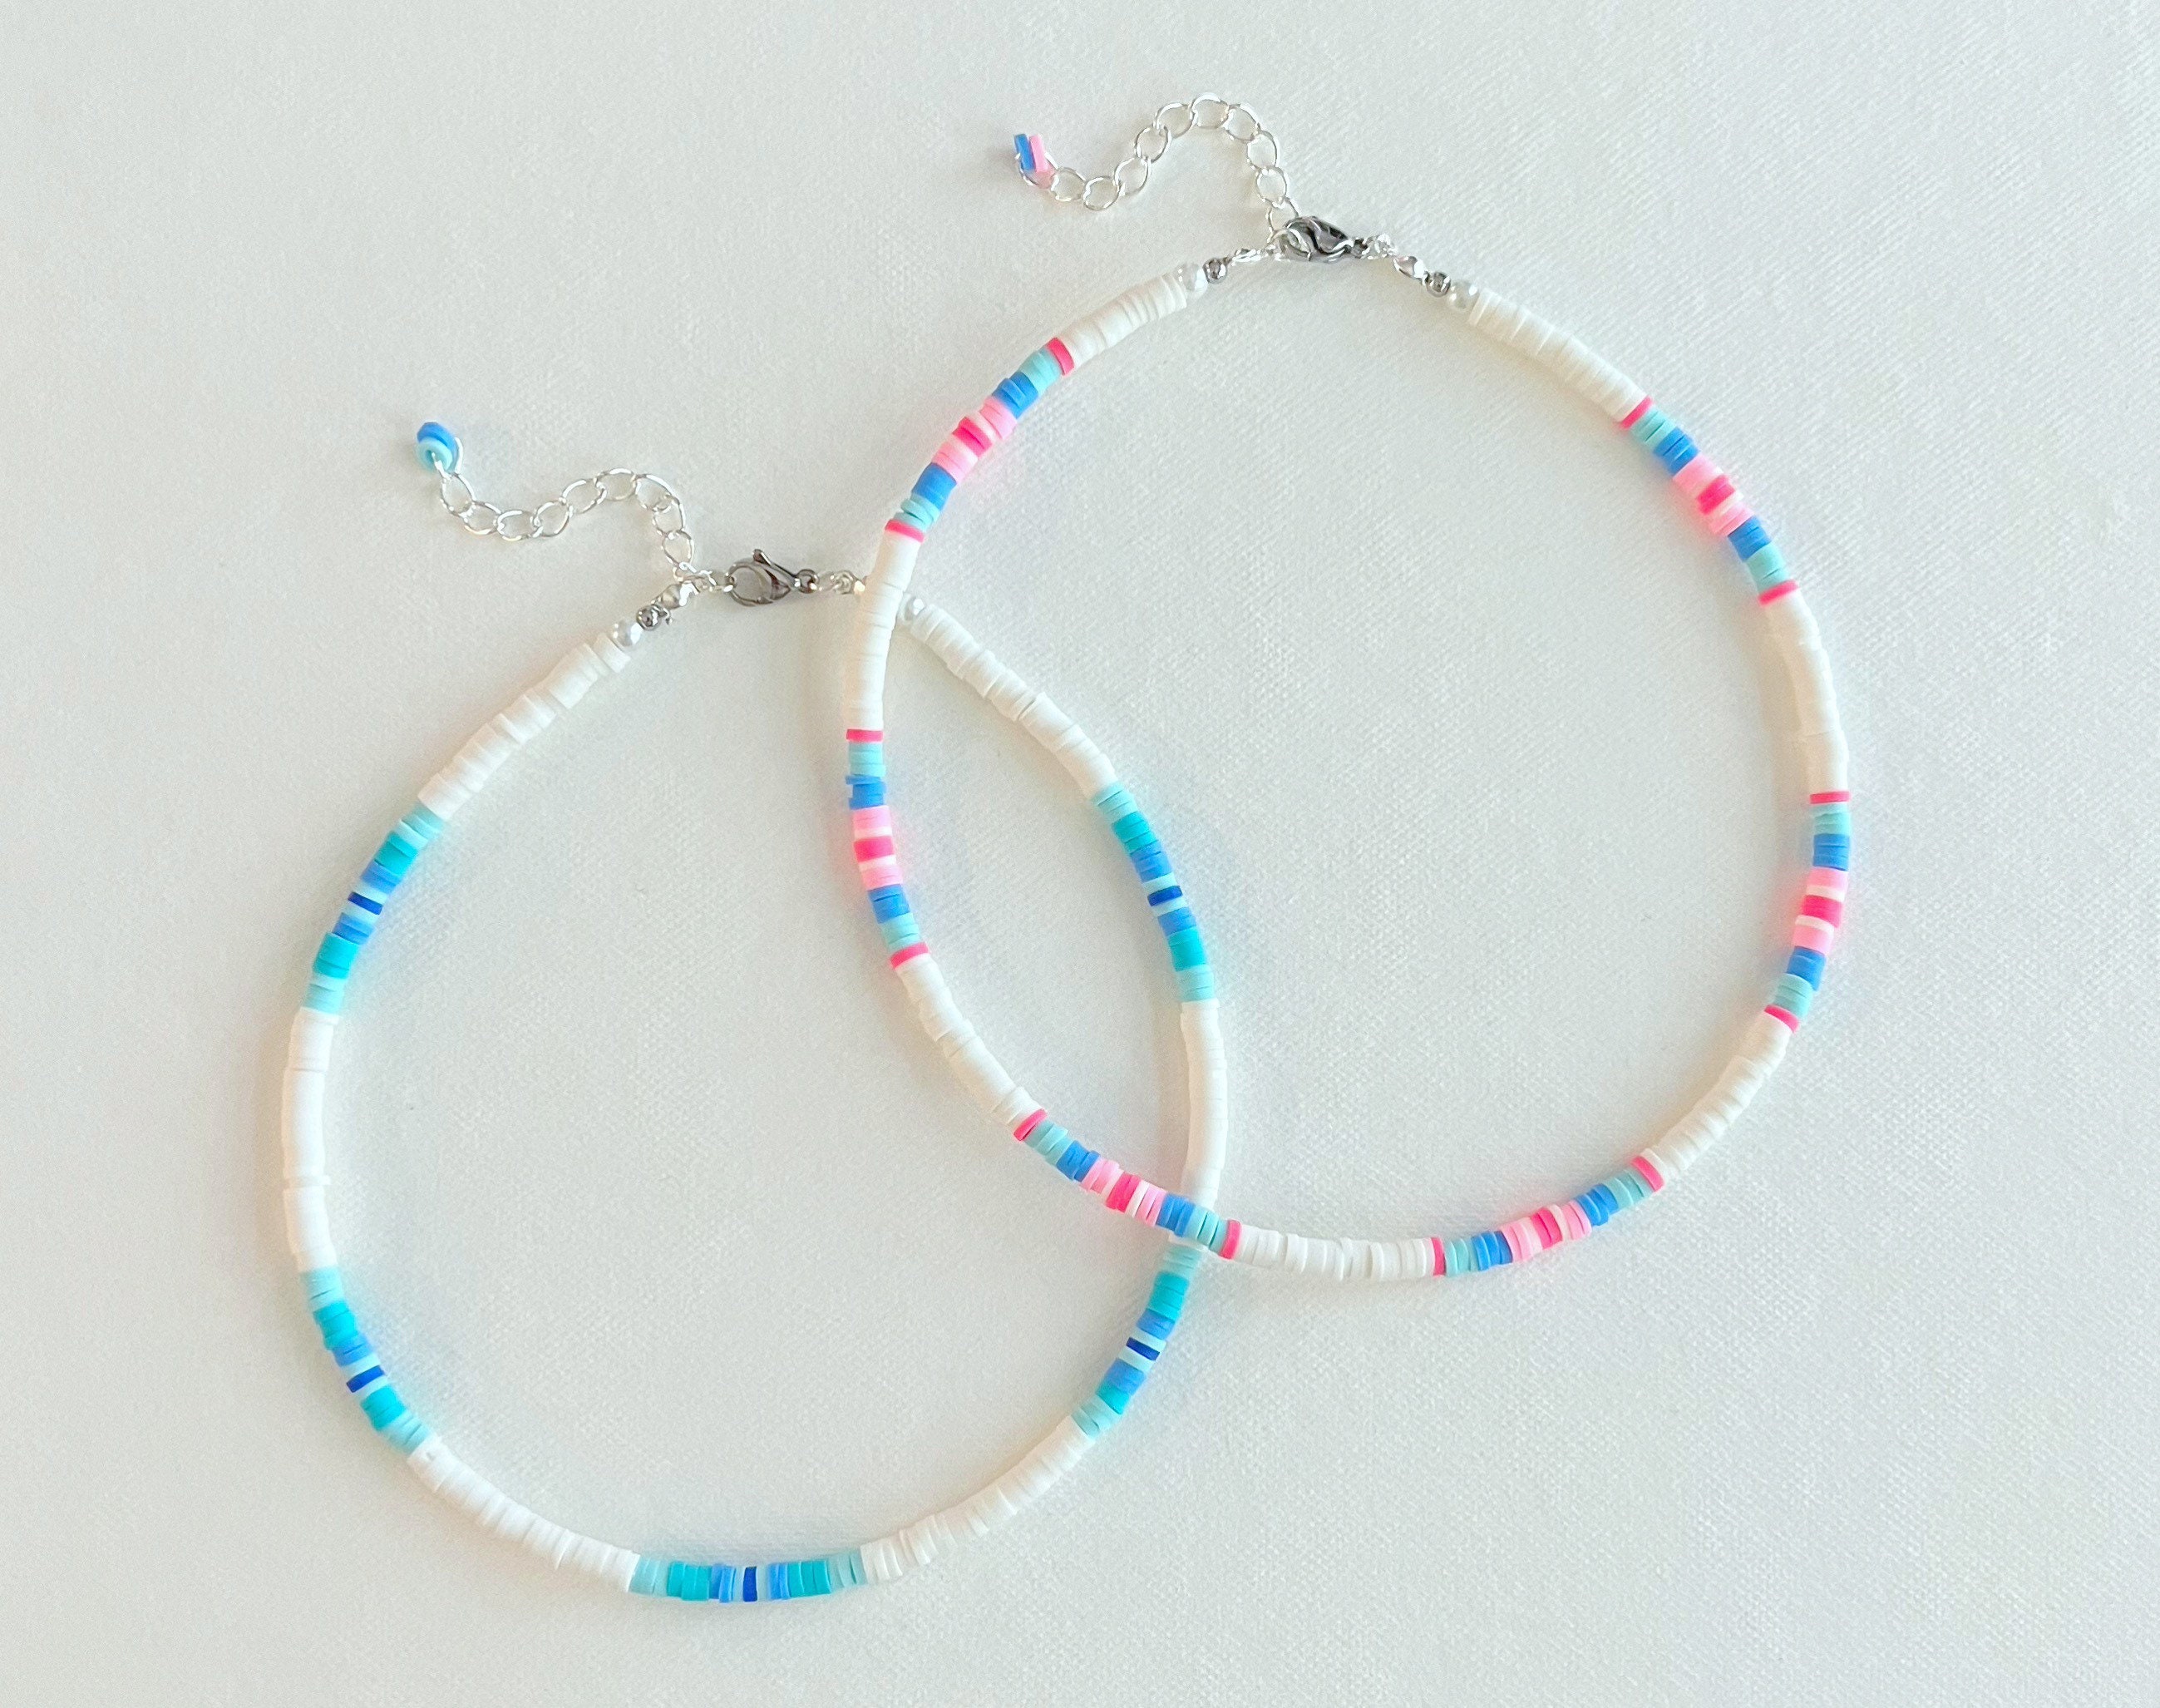 Flat Clay Beads for DIY Jewelry Making - Dearbeads